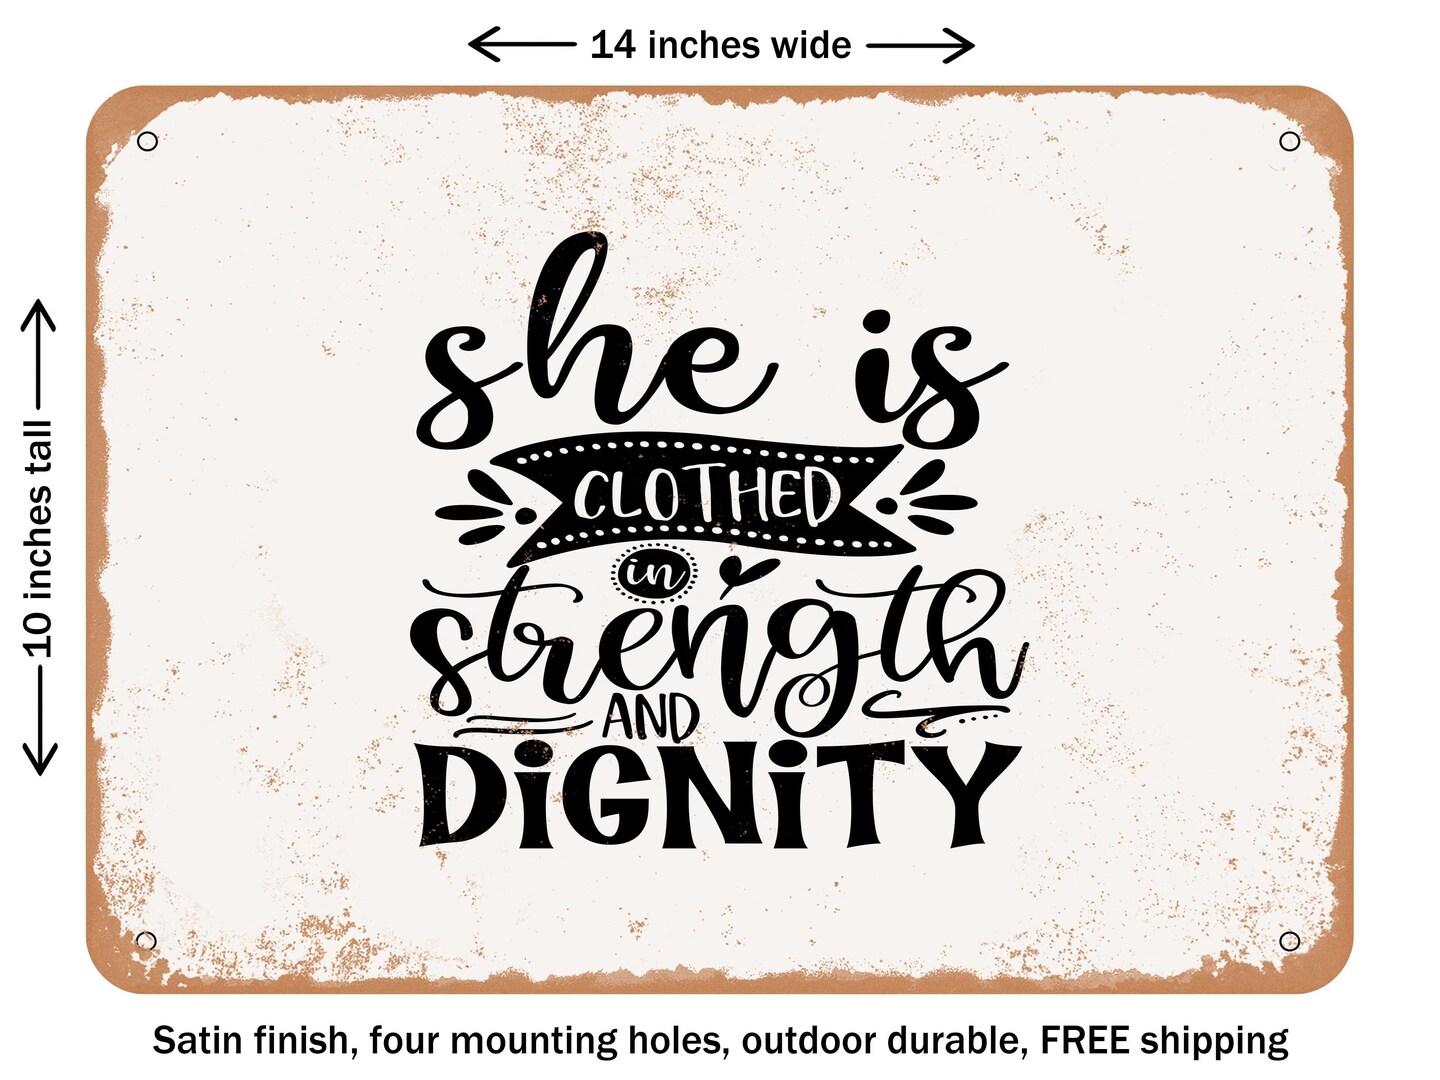 DECORATIVE METAL SIGN - She is Clothed In Strength and Dignity - Vintage Rusty Look